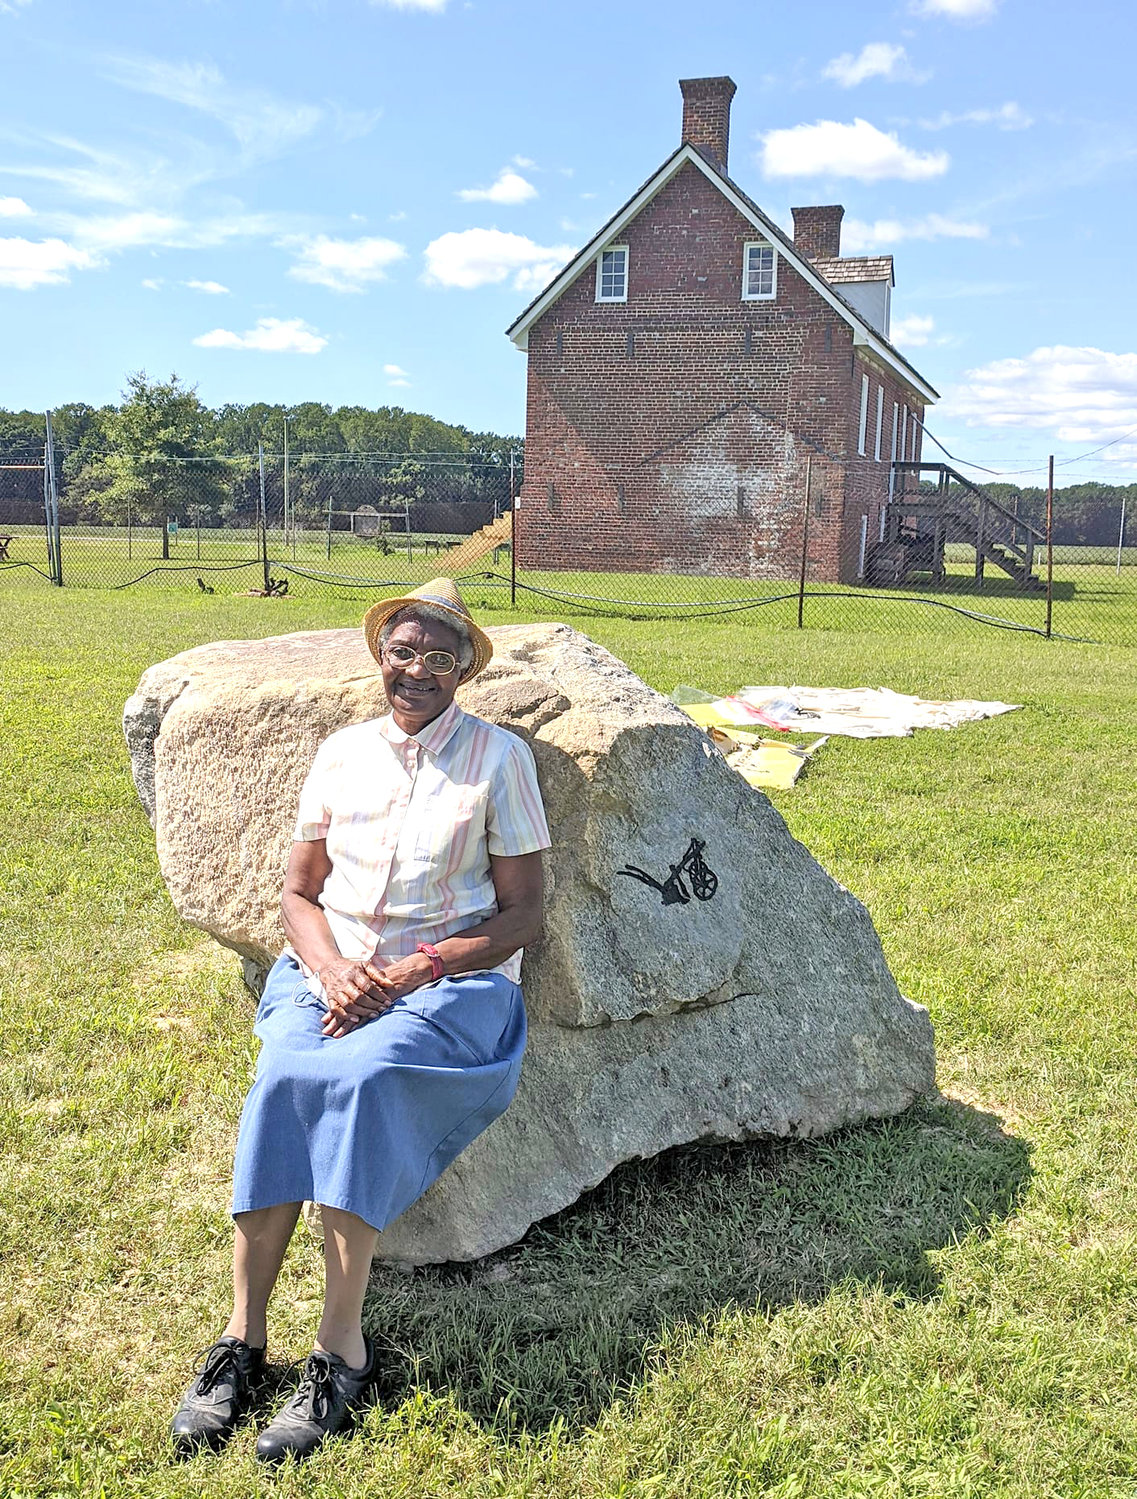 Shirley Jackson is seen seated on a commemorative stone on the Handsell property, near where she lived as a child.